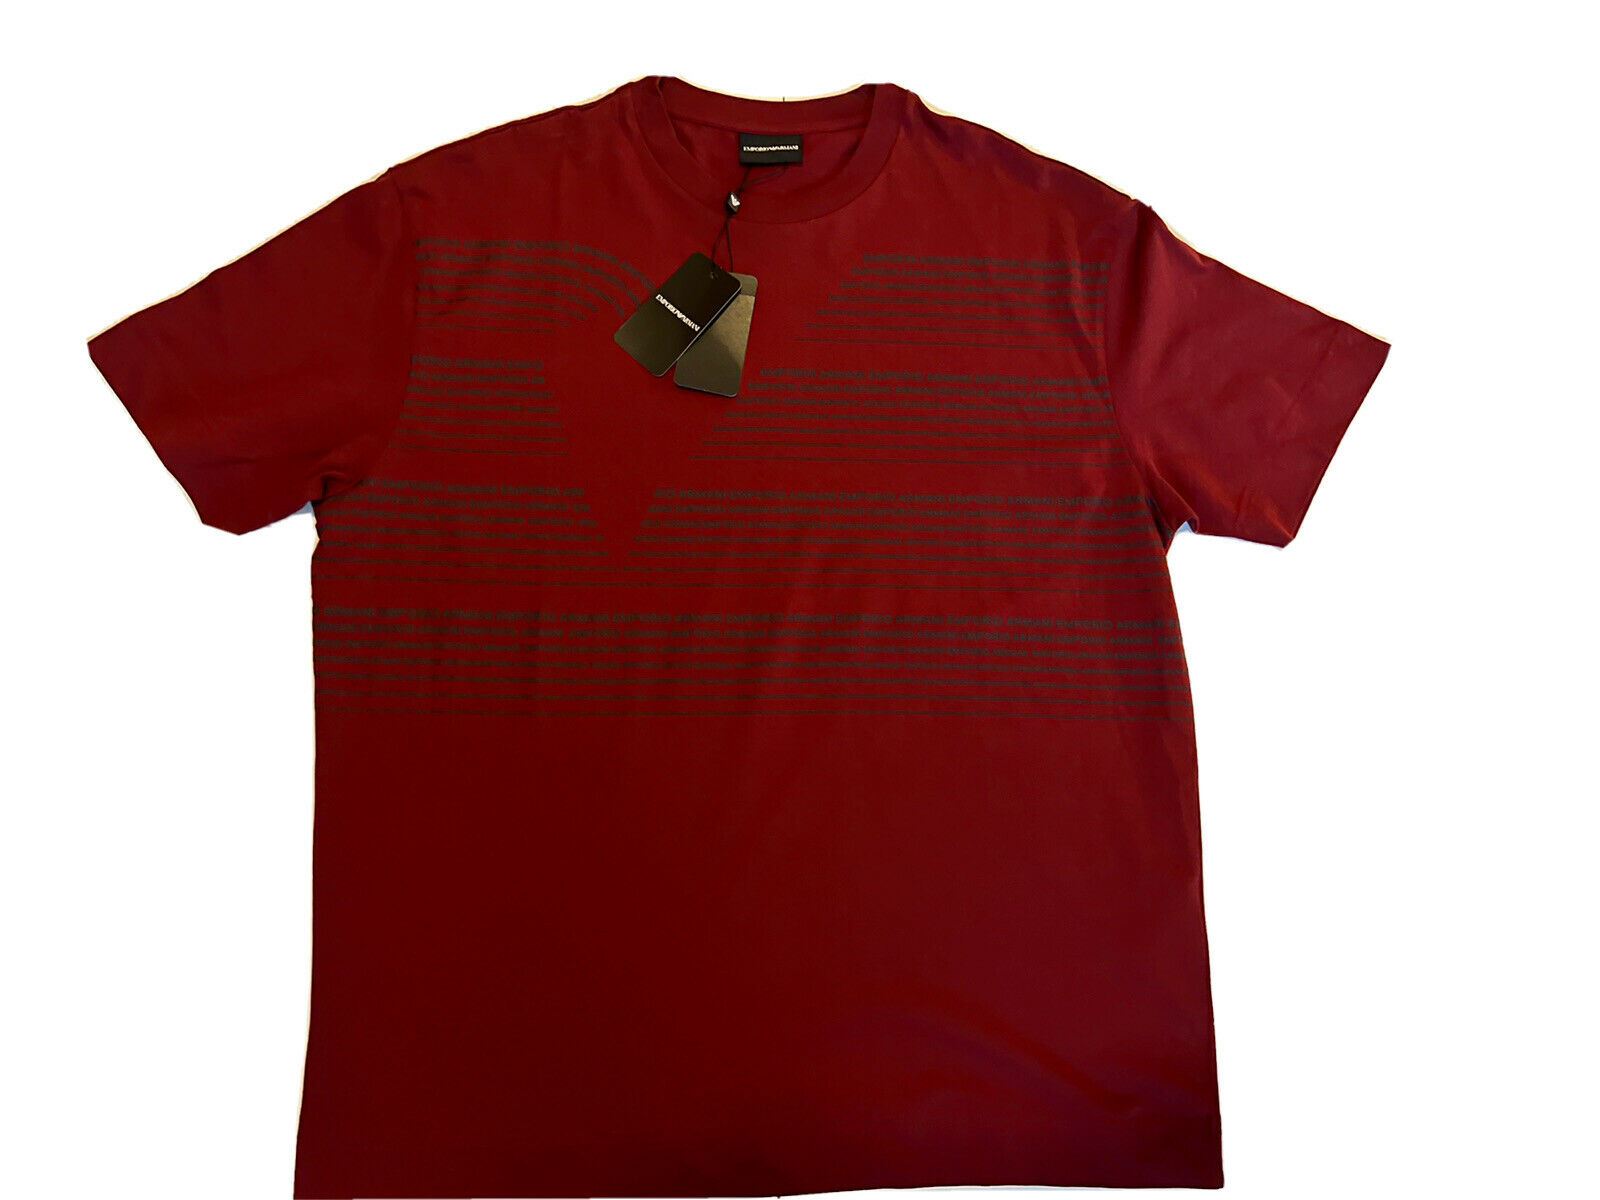 NWT $160 Emporio Armani Red Short Sleeve Graphic T-Shirt Large 6H1T97